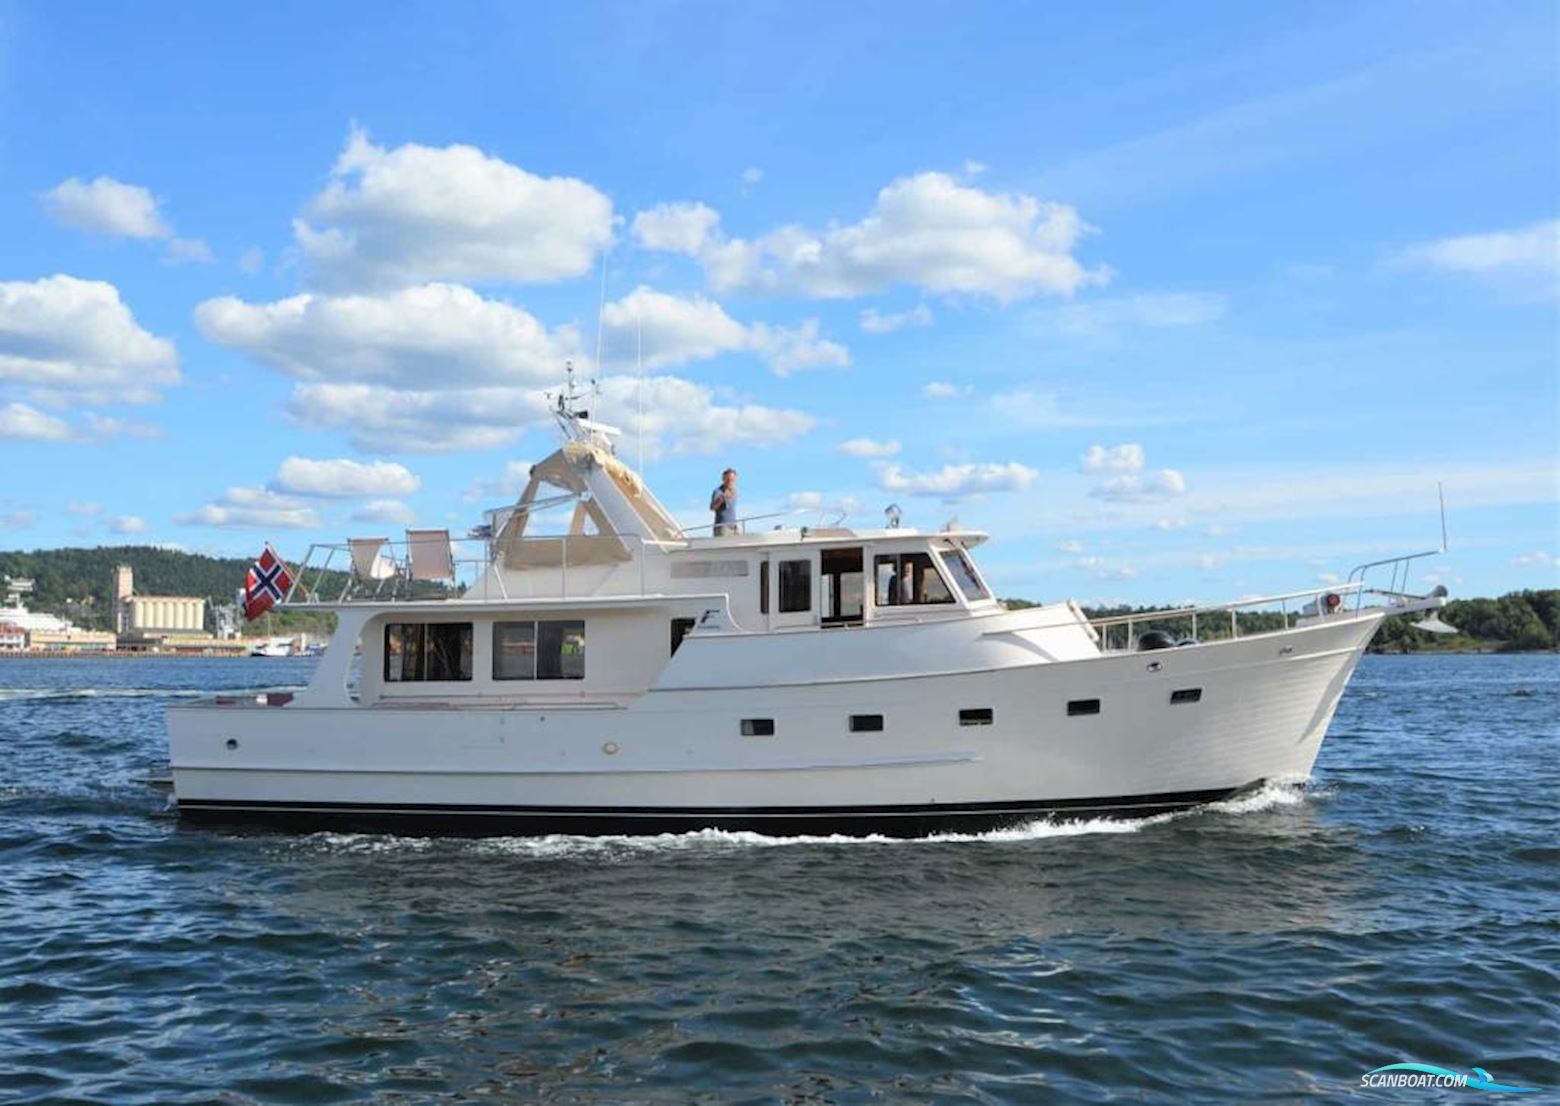 Fleming 53 Motor boat 1991, with Caterpillar 3208 engine, Norway